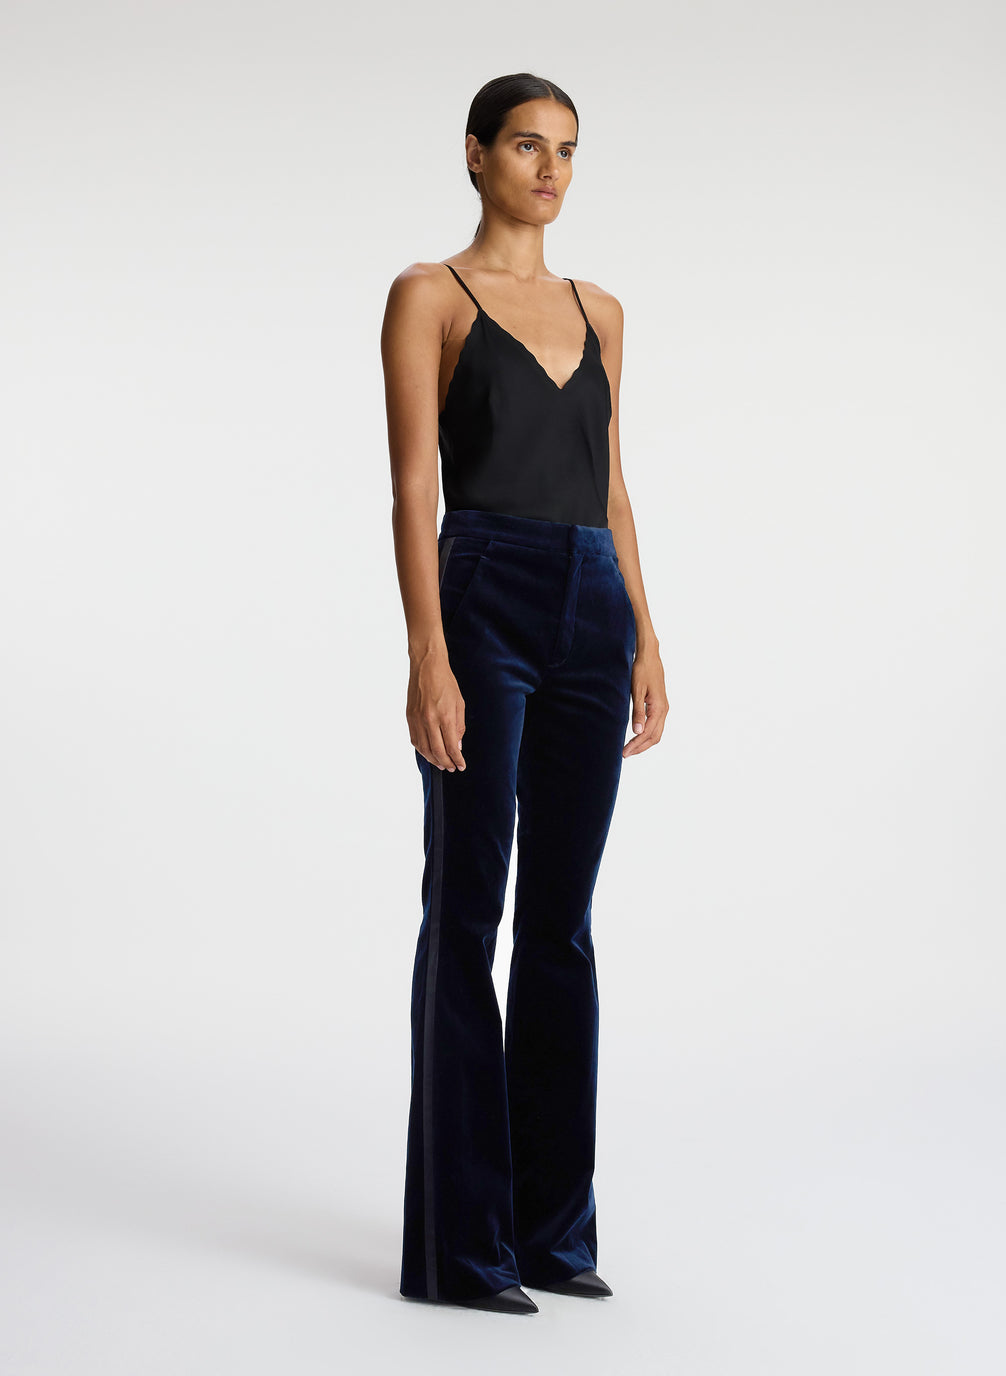 side view of woman wearing black satin camisole and navy blue velvet flared tuxedo pants